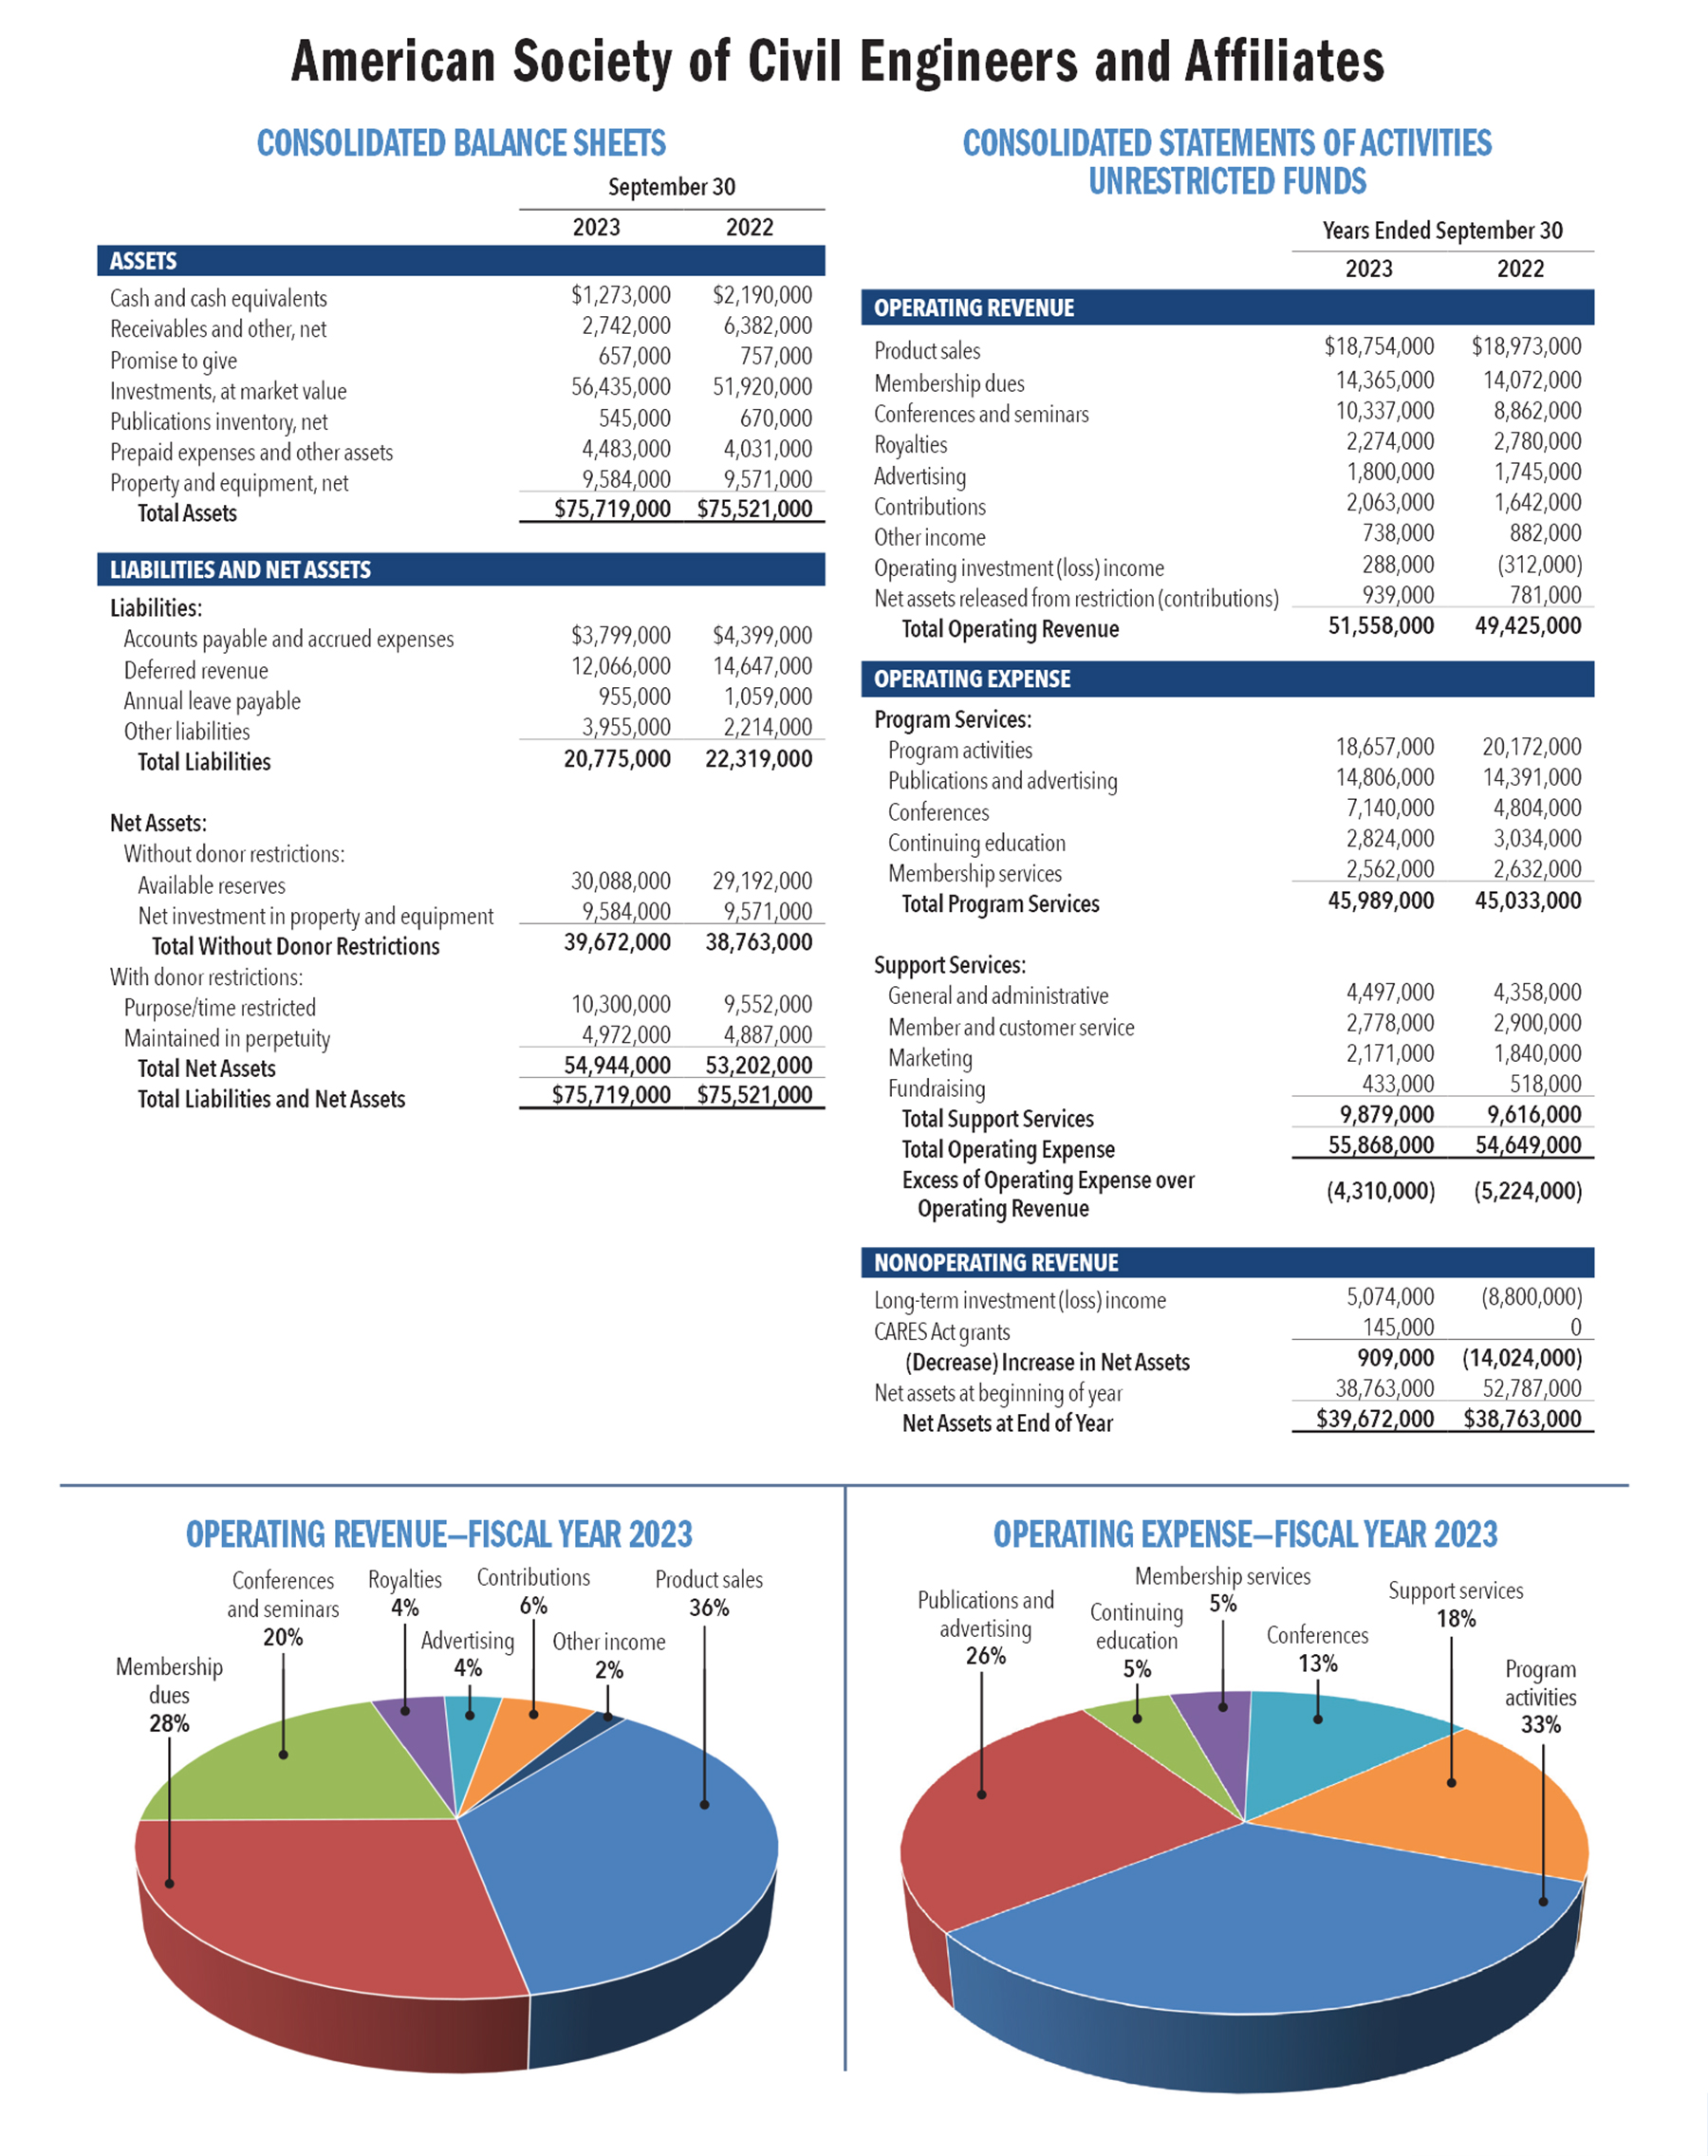 Image shows the 2023 financial statements for the society.